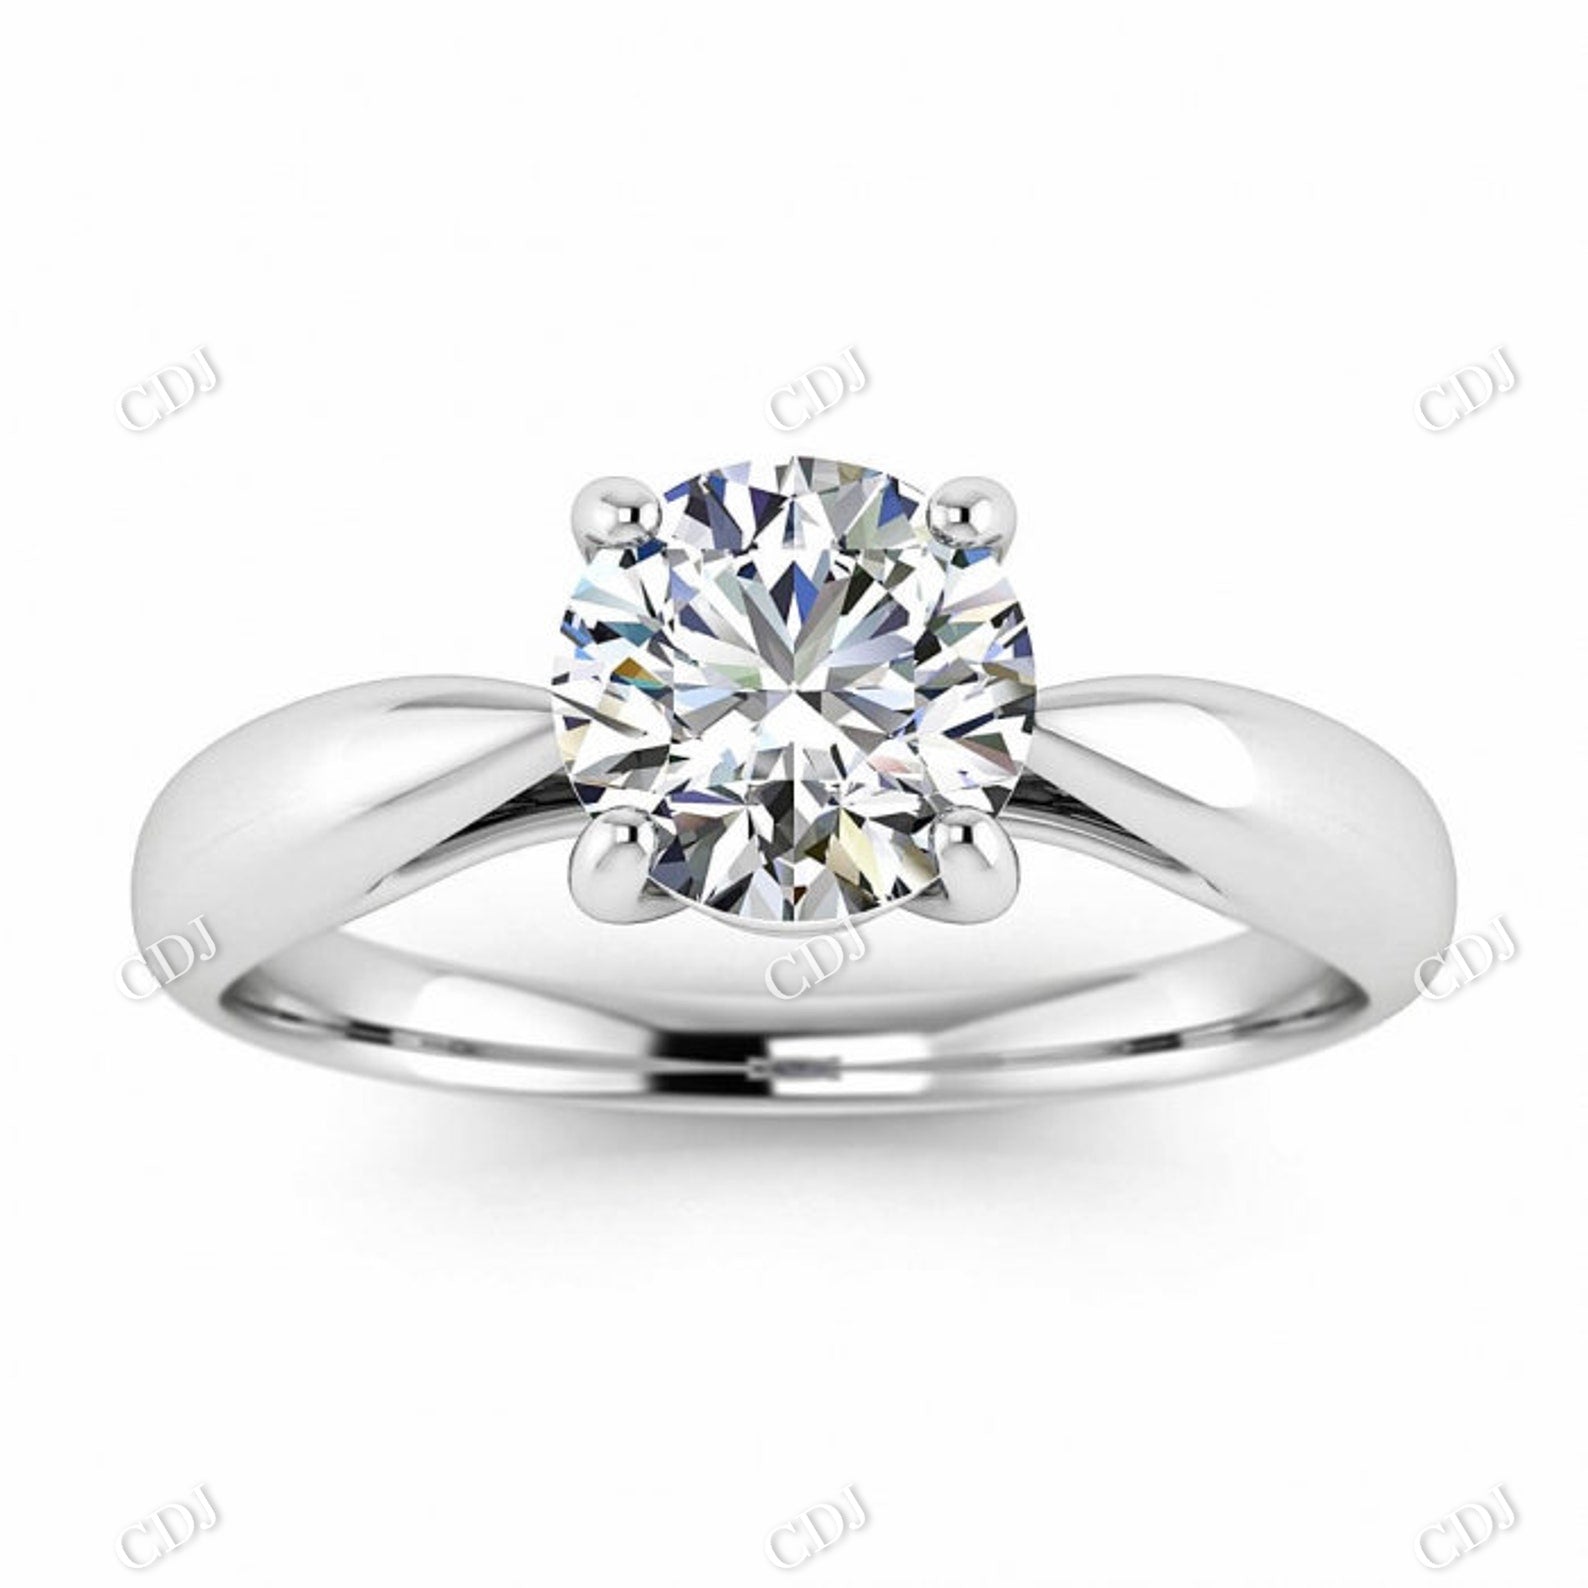 Solid White Gold Tapered Band Solitaire Engagement Ring  customdiamjewel 10KT White Gold VVS-EF